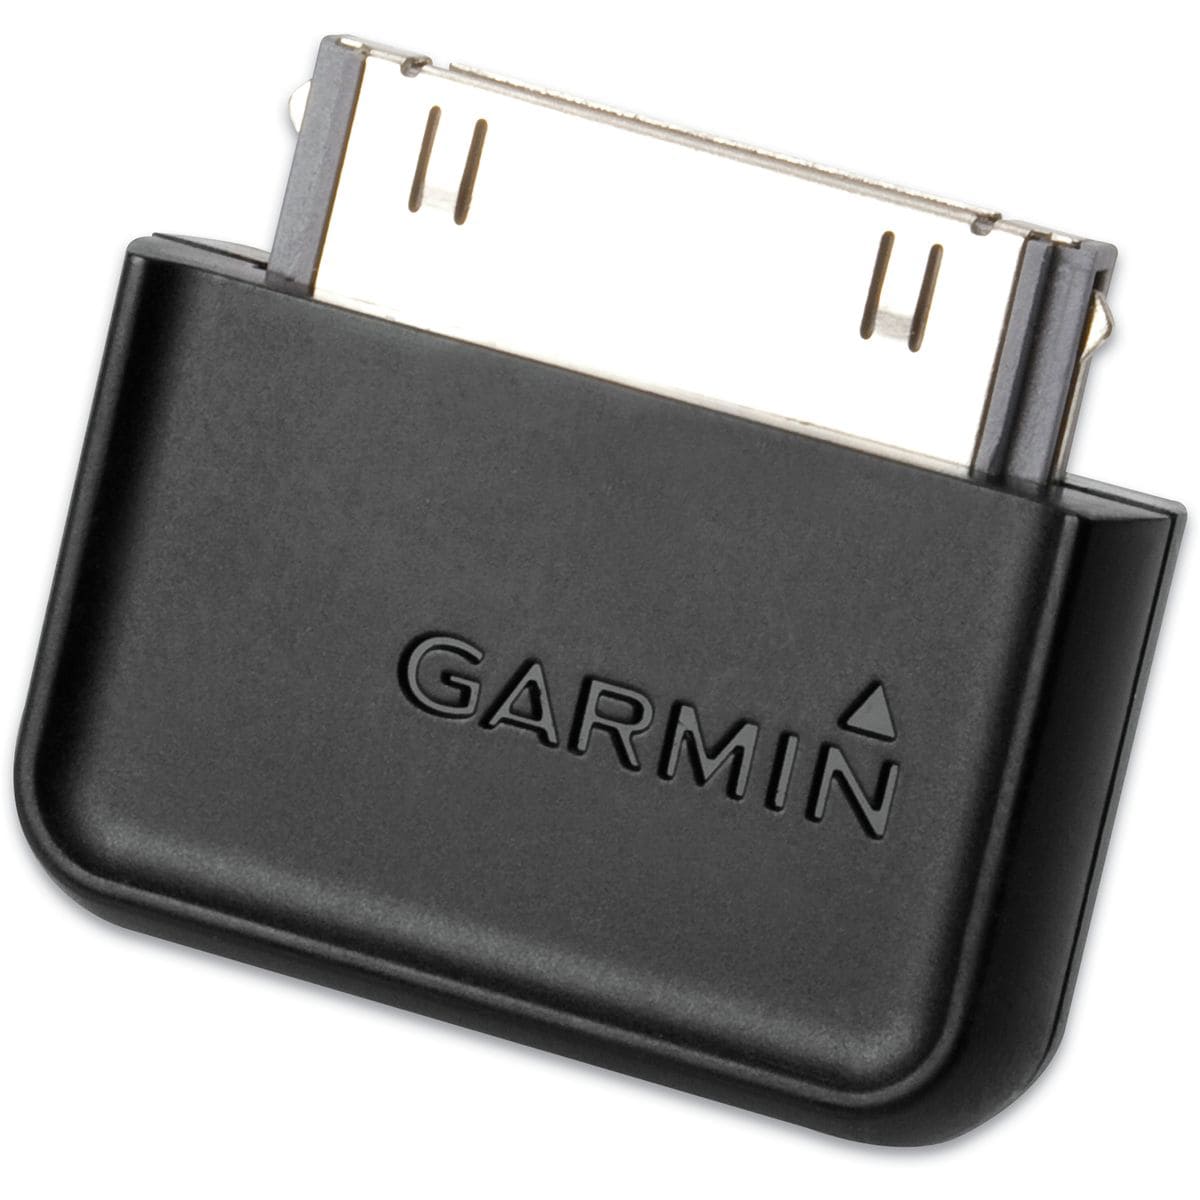 Garmin ANTplus Adapter for iPhone